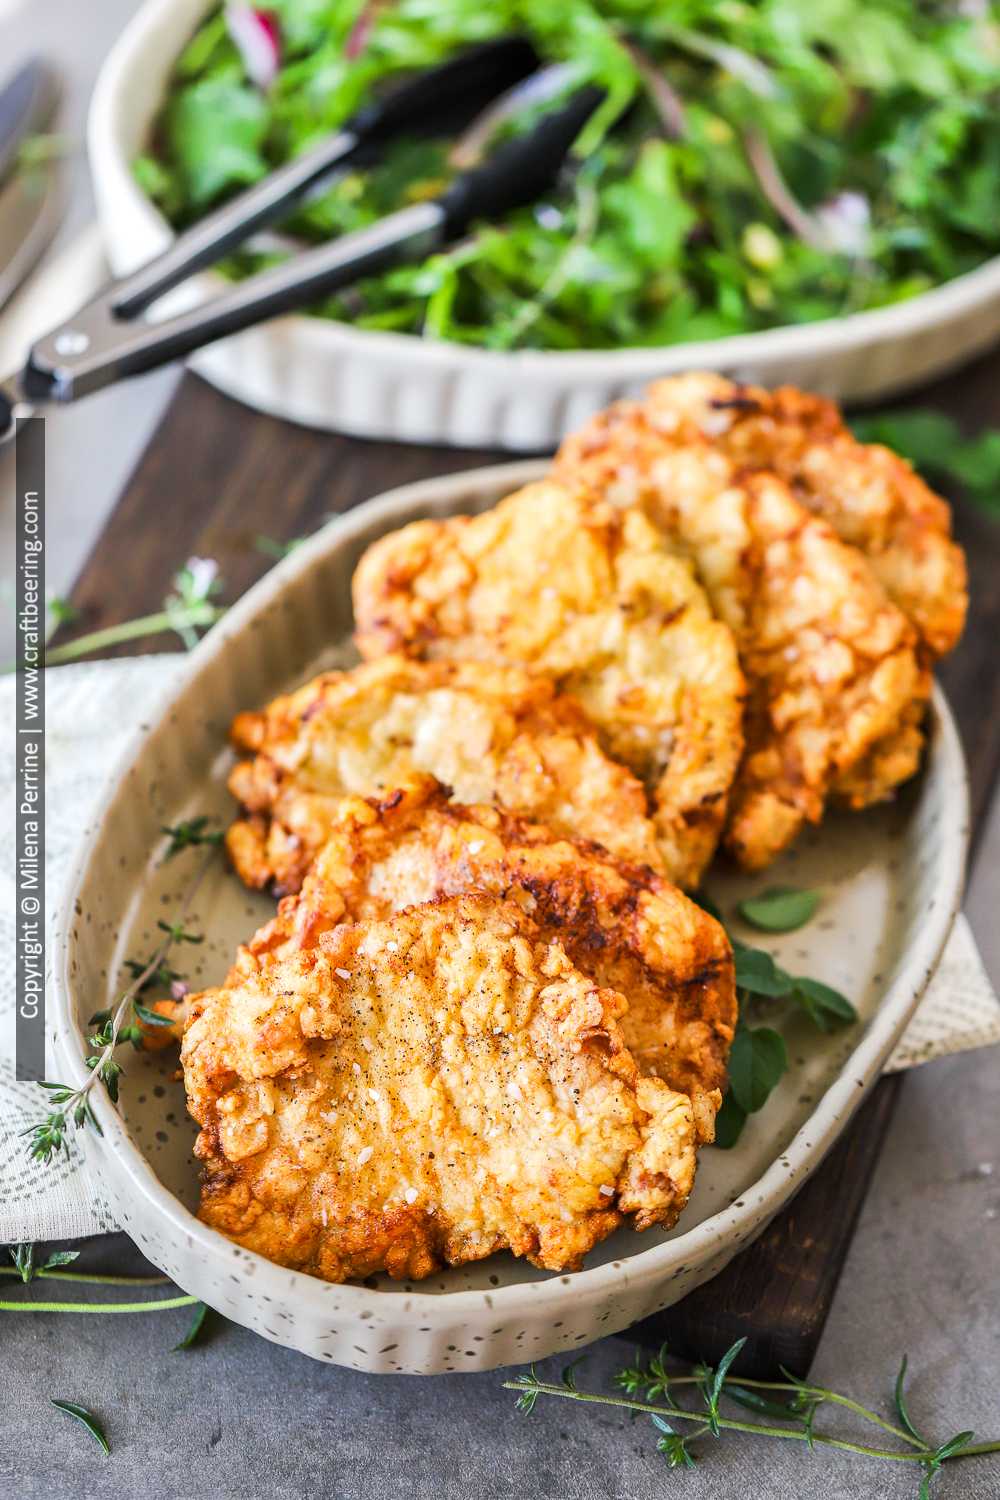 Country fried pork chops with crispy breaded coating. 